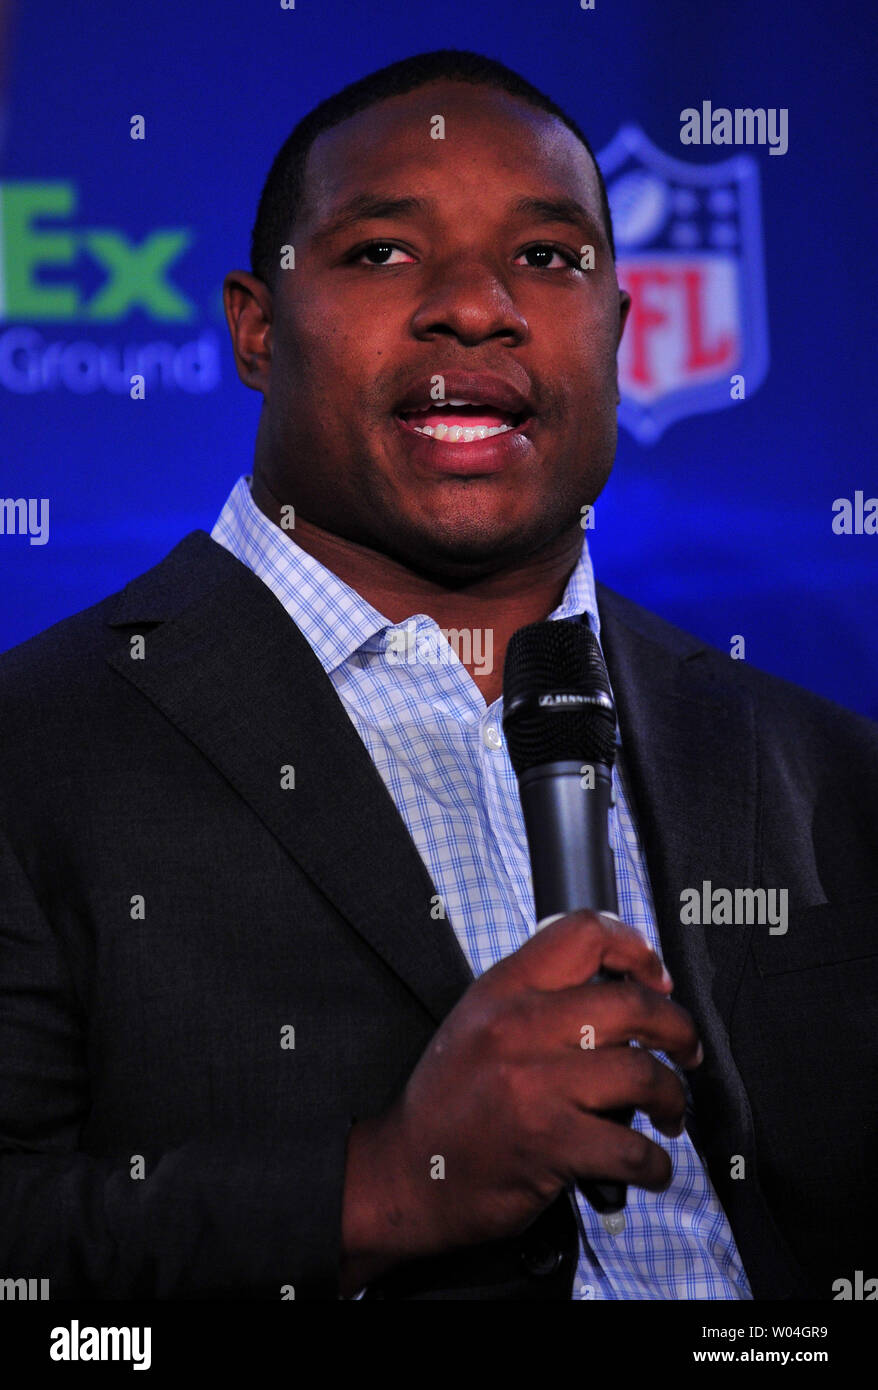 Jacksonville Jaguars running back Maurice Jones Drew speaks after being named the runner up at the FedEx 2011 Ground NFL Player of the Year awards ceremony in Indianapolis during Super Bowl week on February 1, 2012, 2012.  Philadelphia Eagles running back LeSean McCoy won the award  UPI/Kevin Dietsch Stock Photo